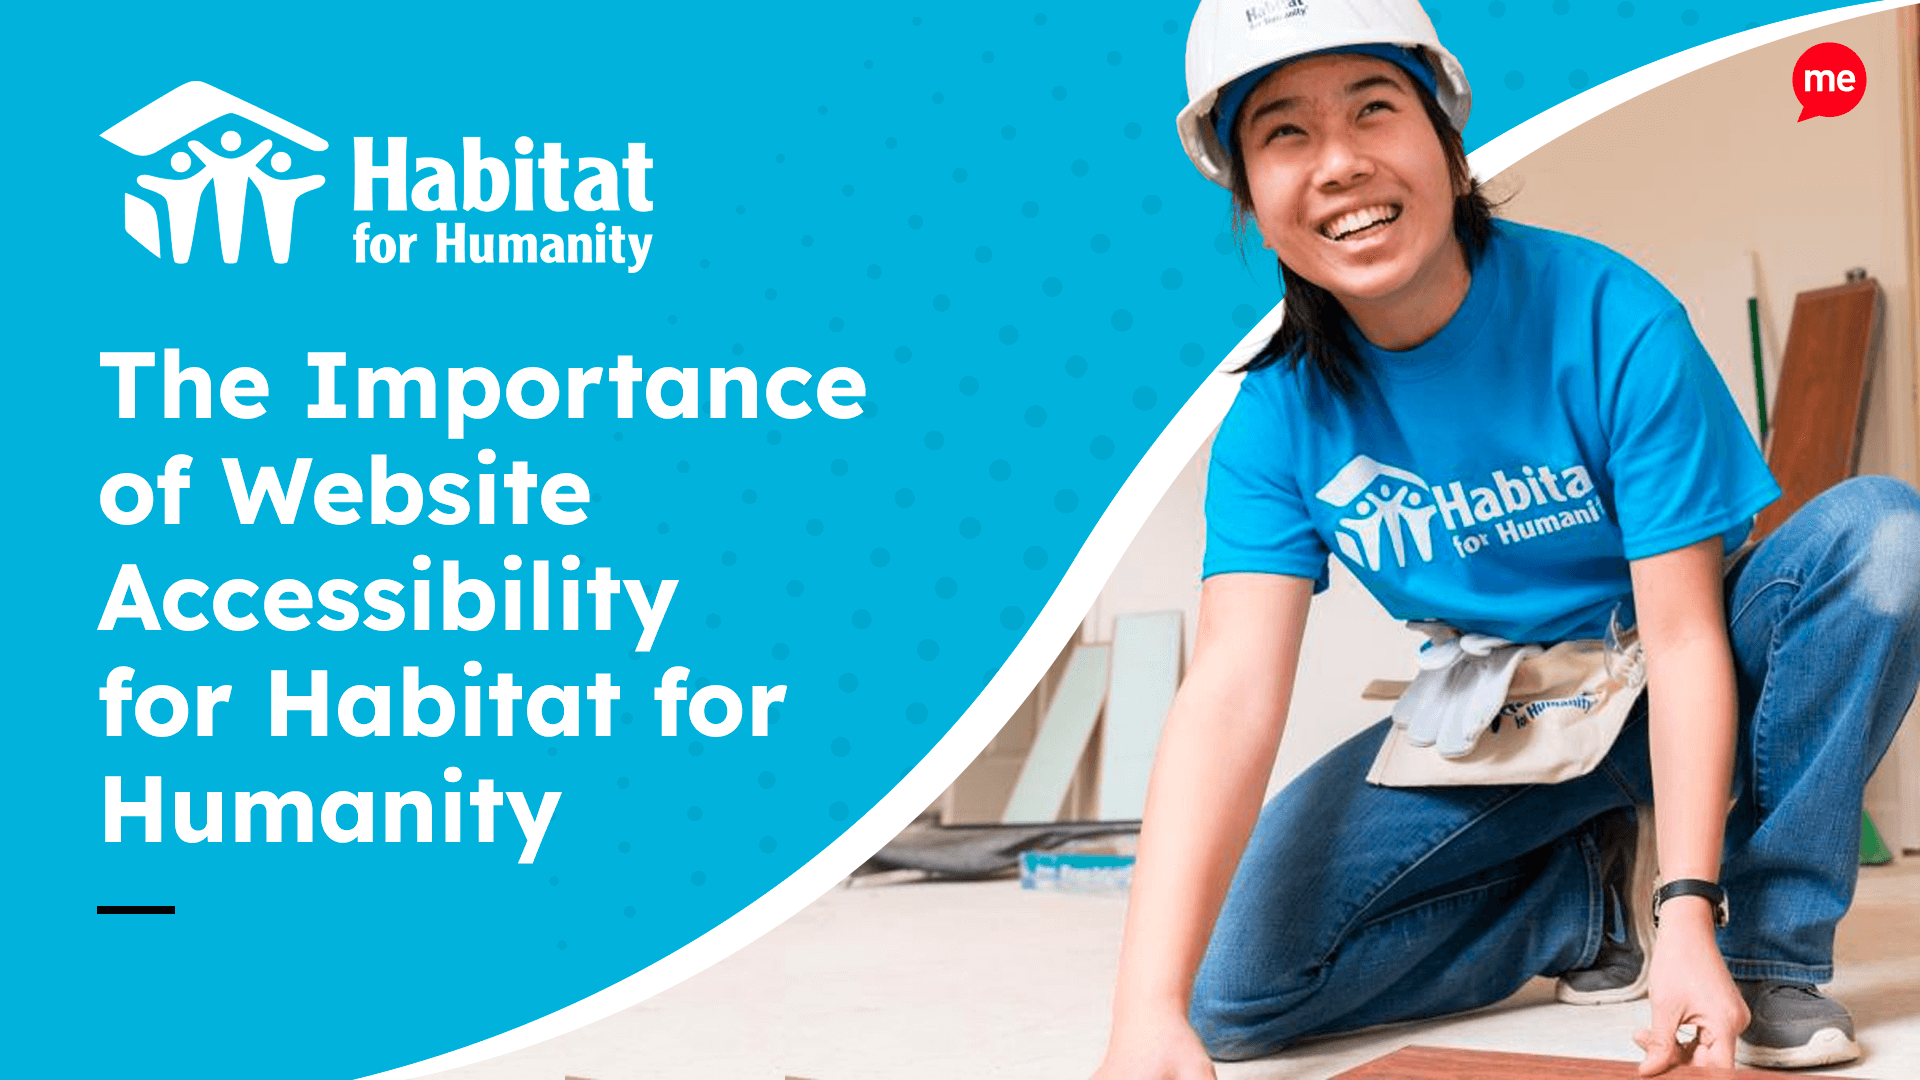 The Importance of Website Accessibility for Habitat for Humanity with an image of a young woman at a Habitat for Humanity build site